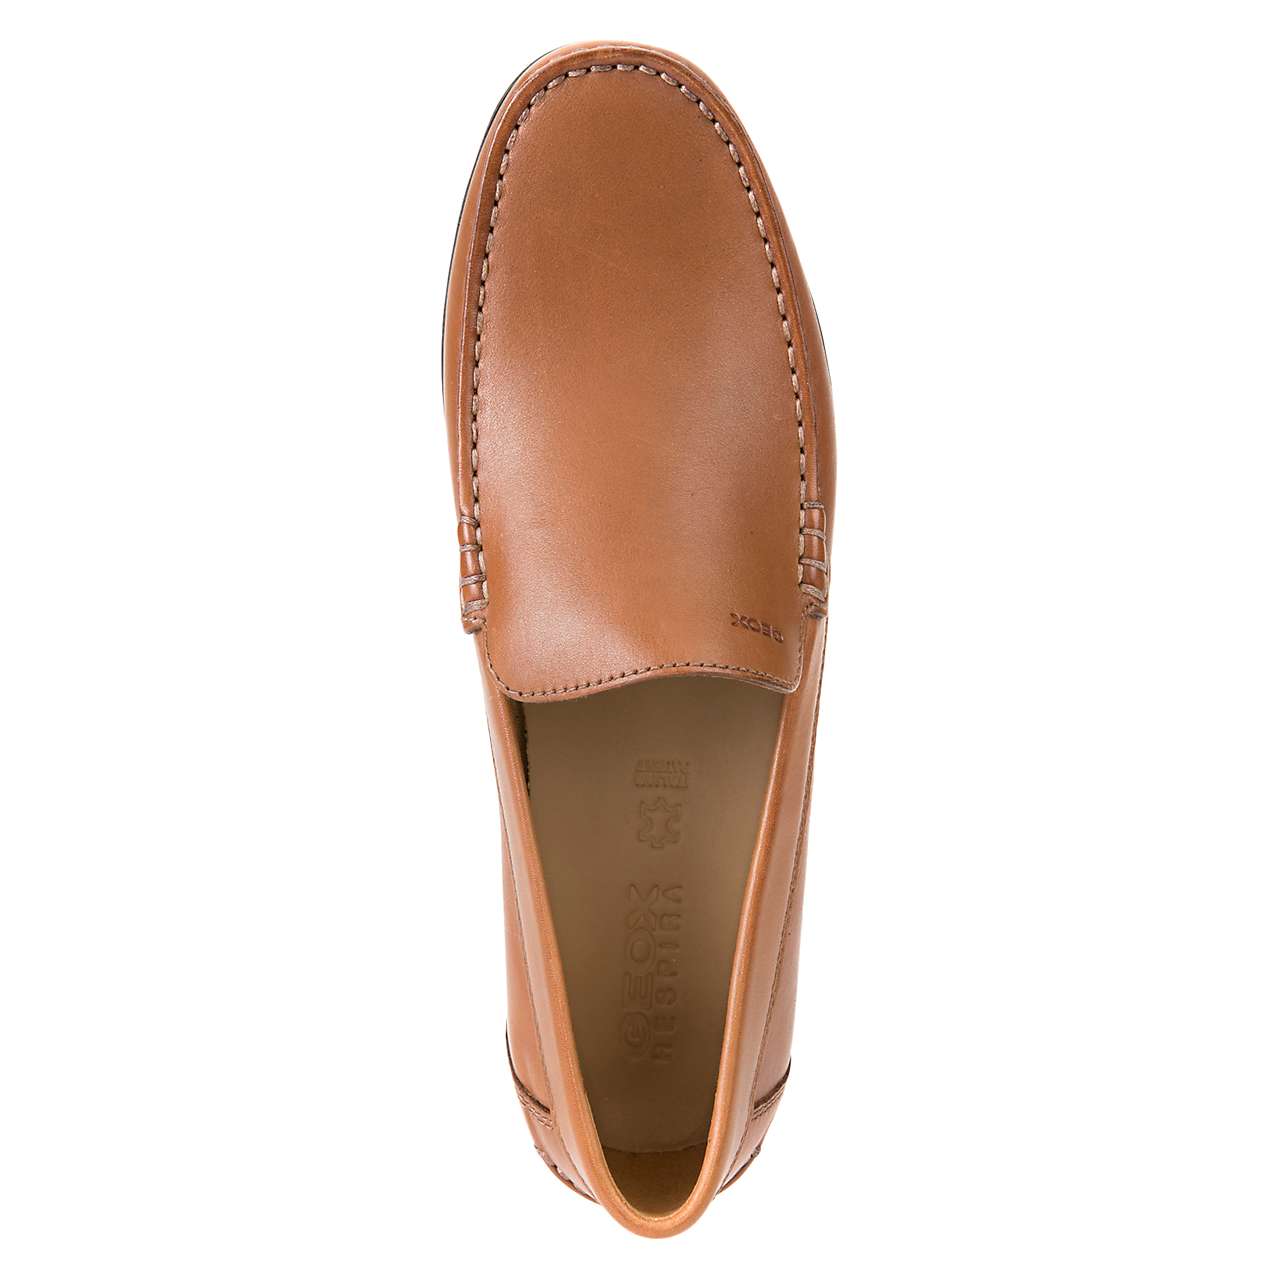 Buy Geox Simon Leather Moccasins Online at johnlewis.com